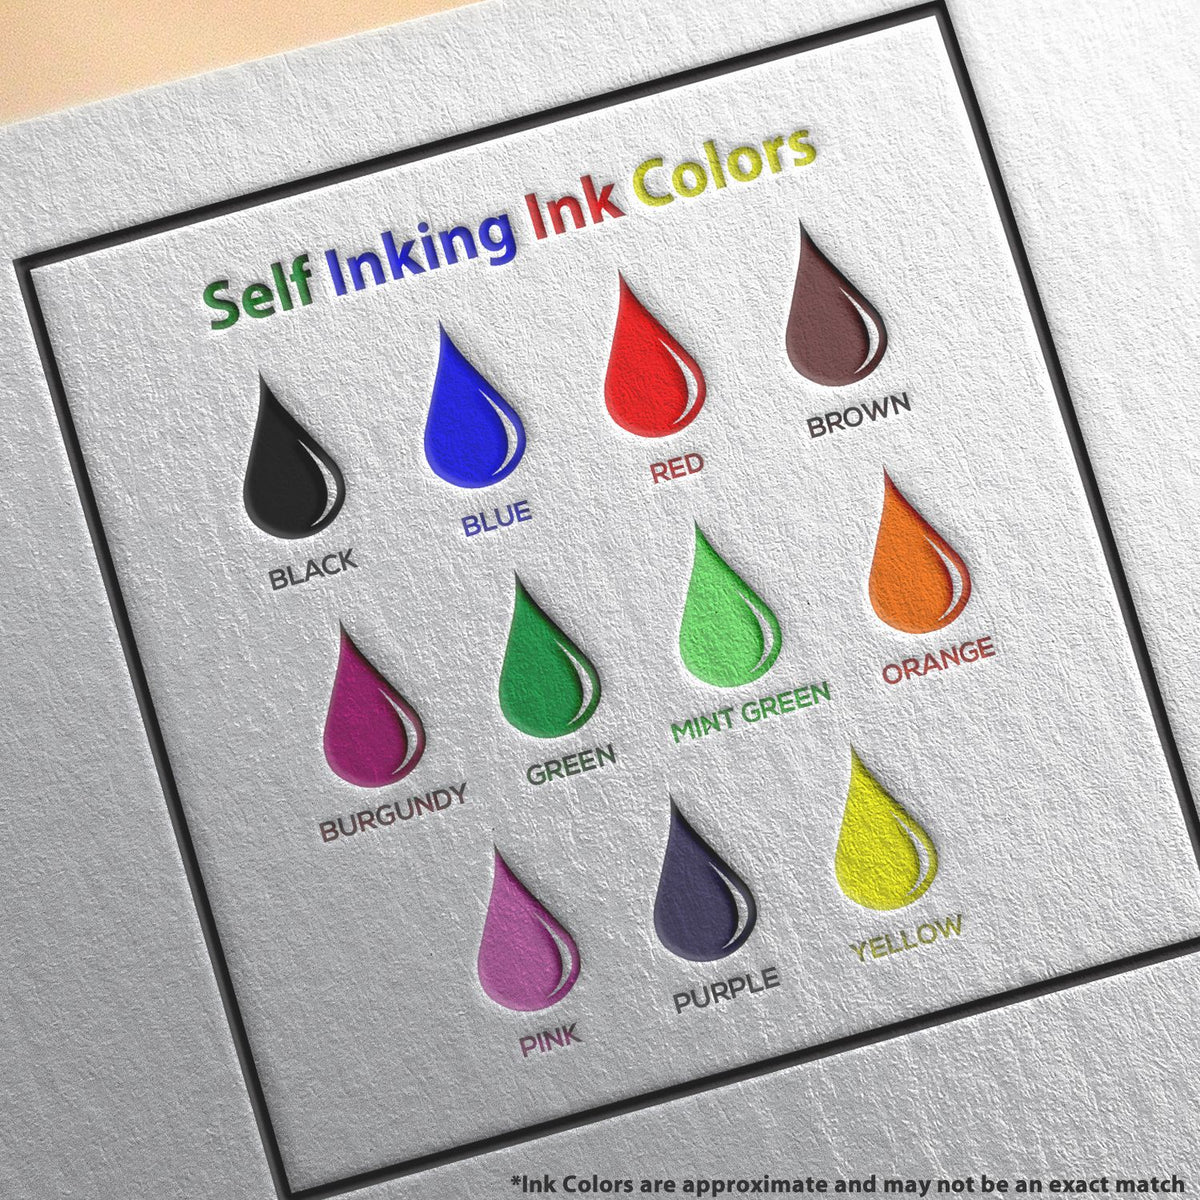 A picture showing the different ink colors or hues available for the Self-Inking Alaska PE Stamp product.